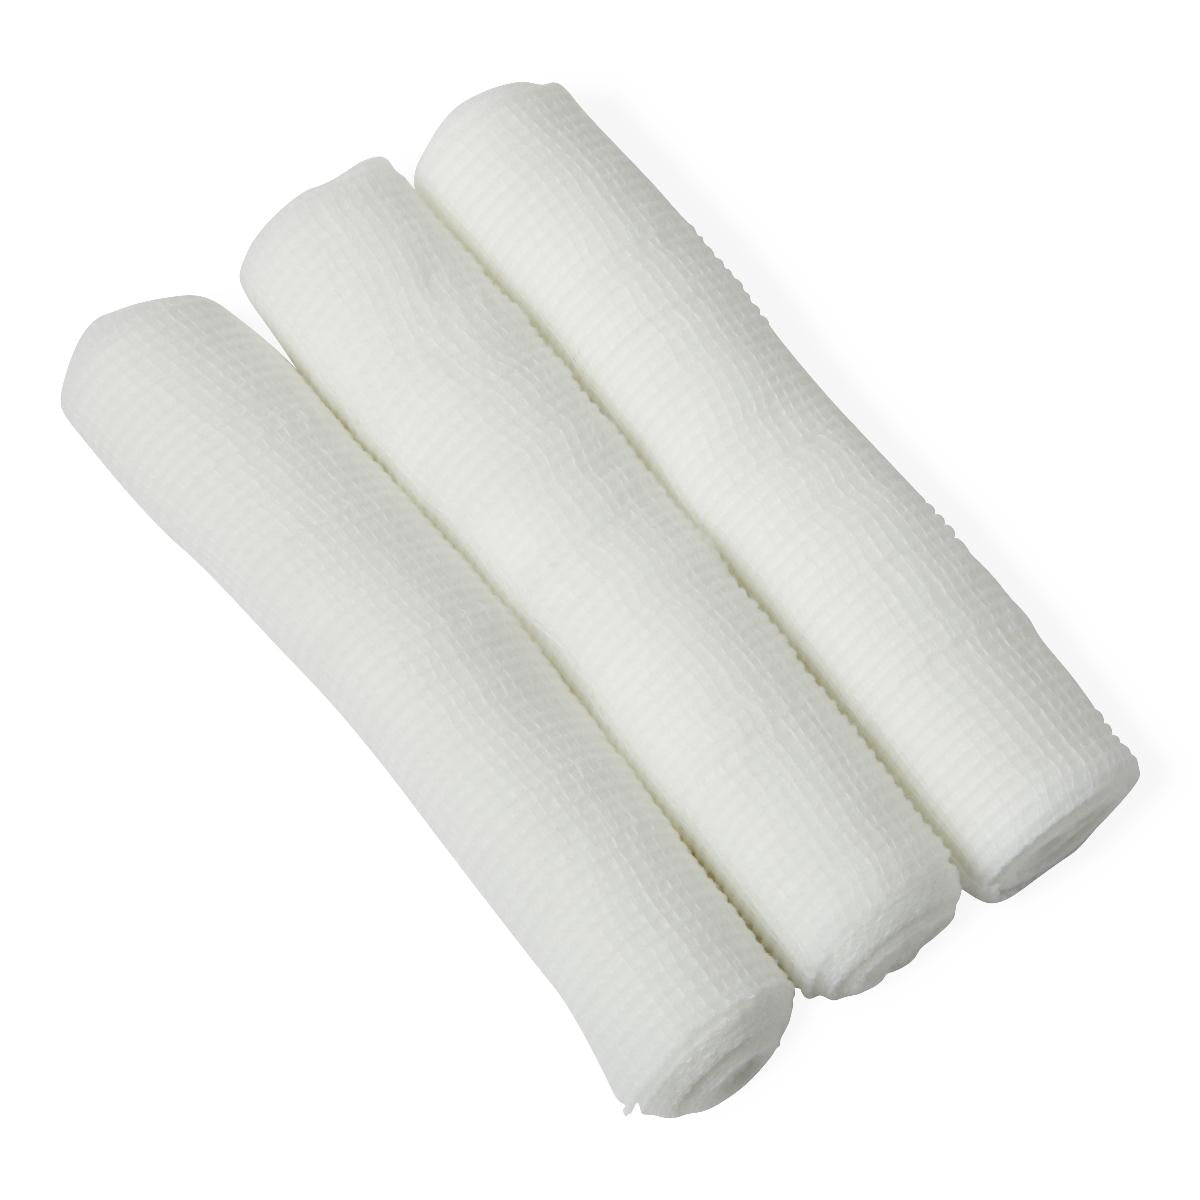 48 Each-Case / 80.00000 IN / Rayon/Polyester Wound Care - MEDLINE - Wasatch Medical Supply